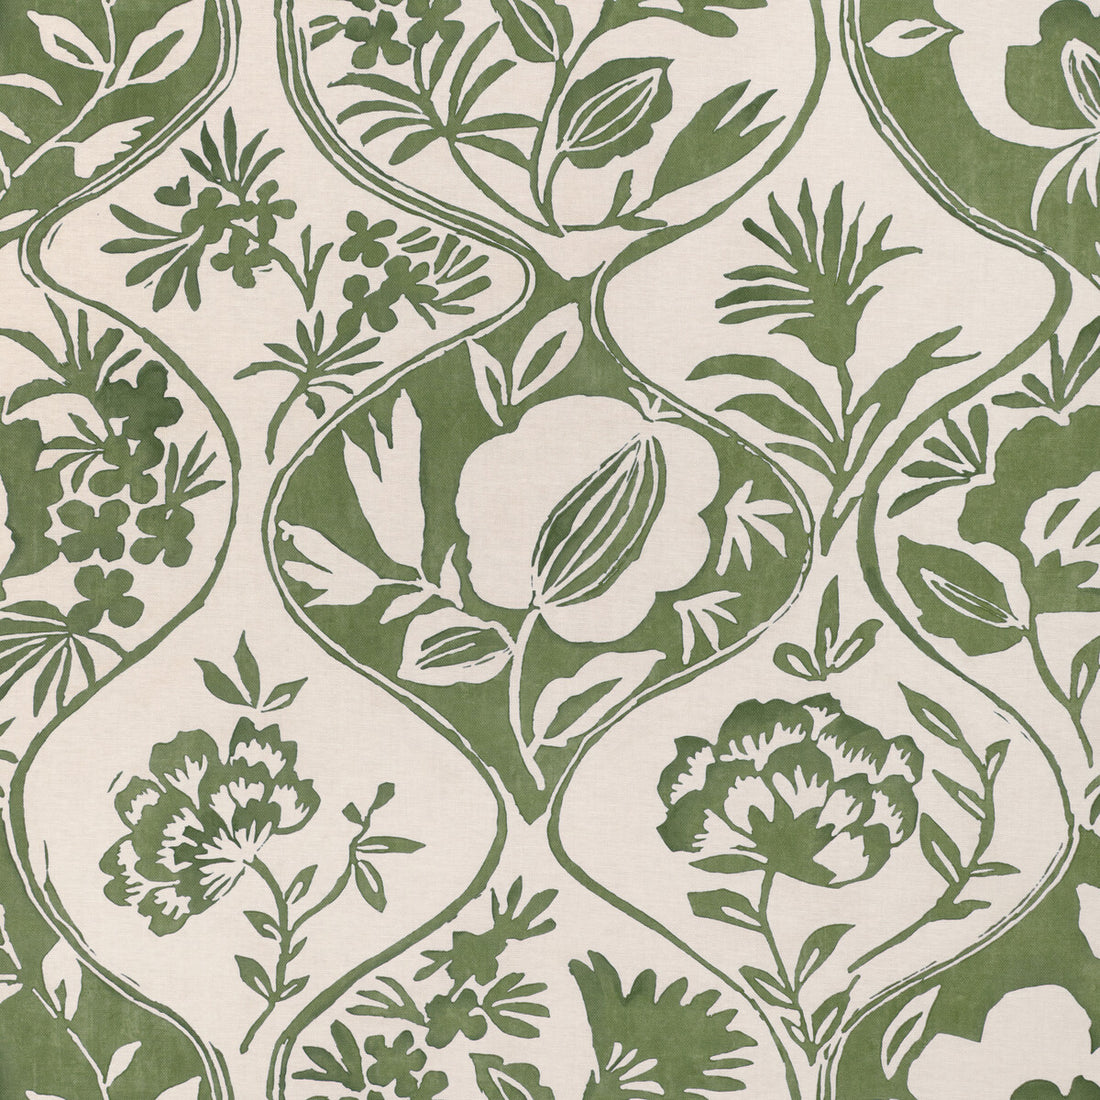 Calathea Print fabric in leaf color - pattern 2023141.30.0 - by Lee Jofa in the Garden Walk collection